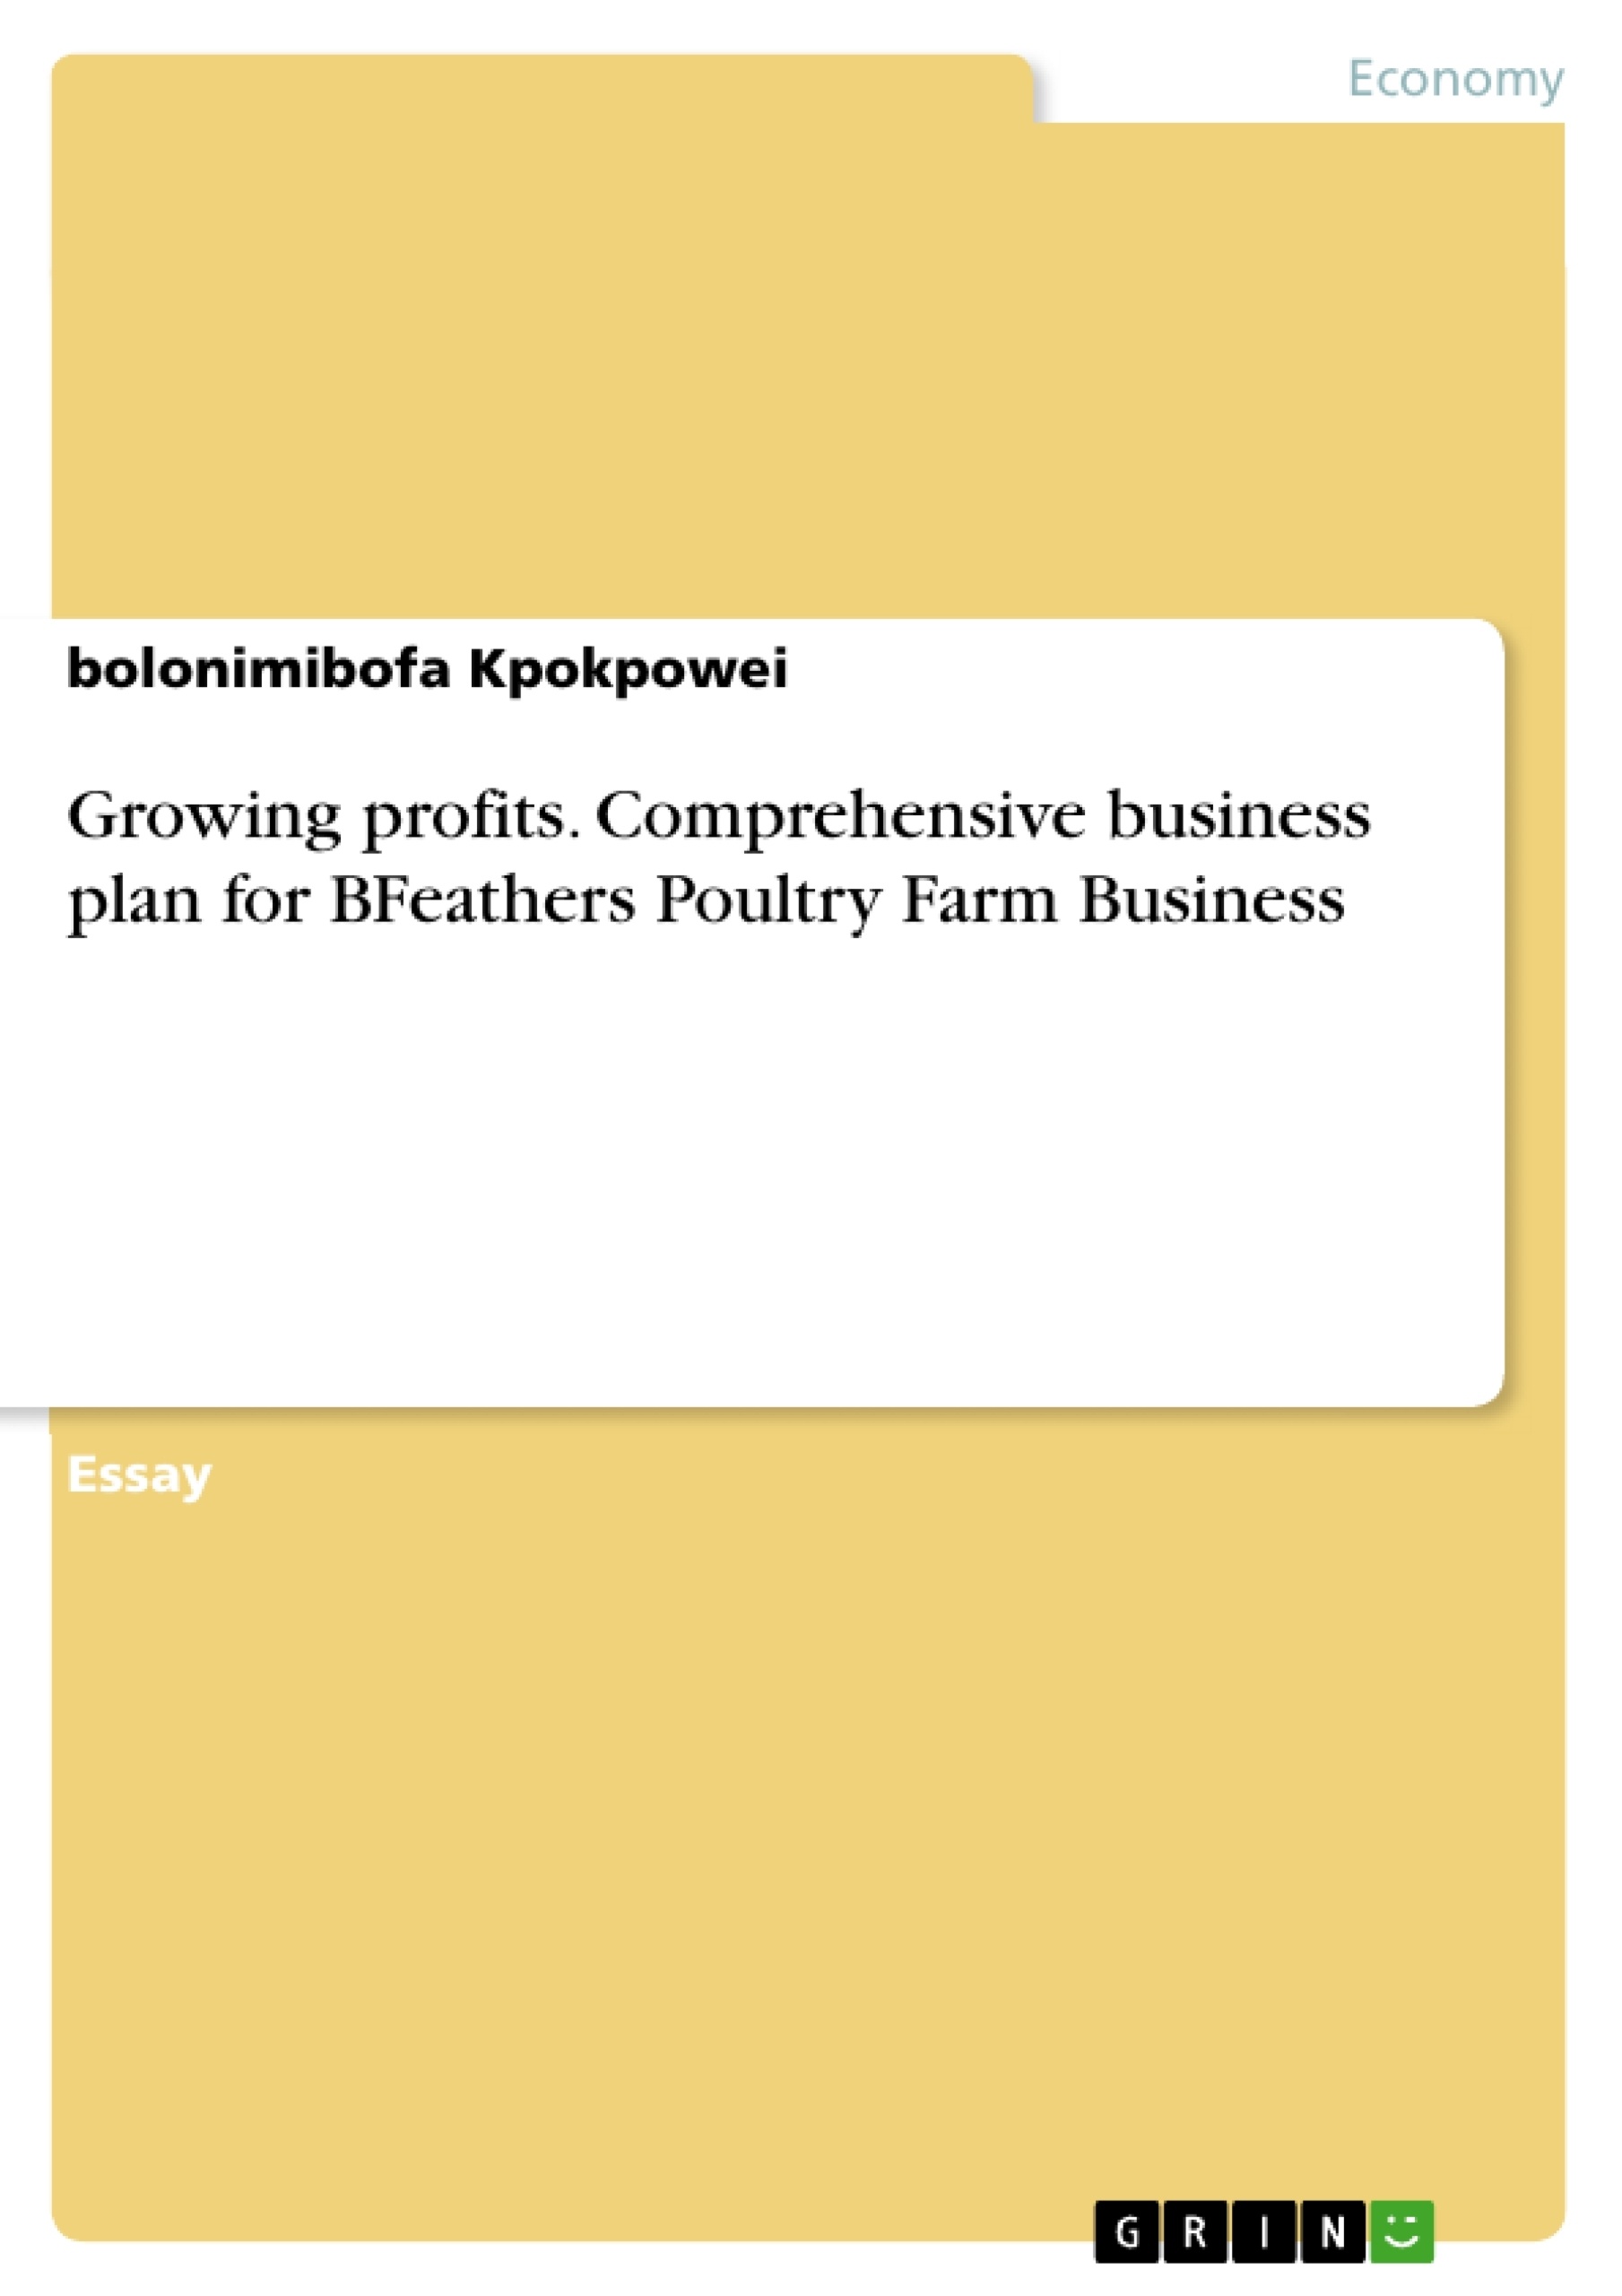 Title: Growing profits. Comprehensive business plan for BFeathers Poultry Farm Business